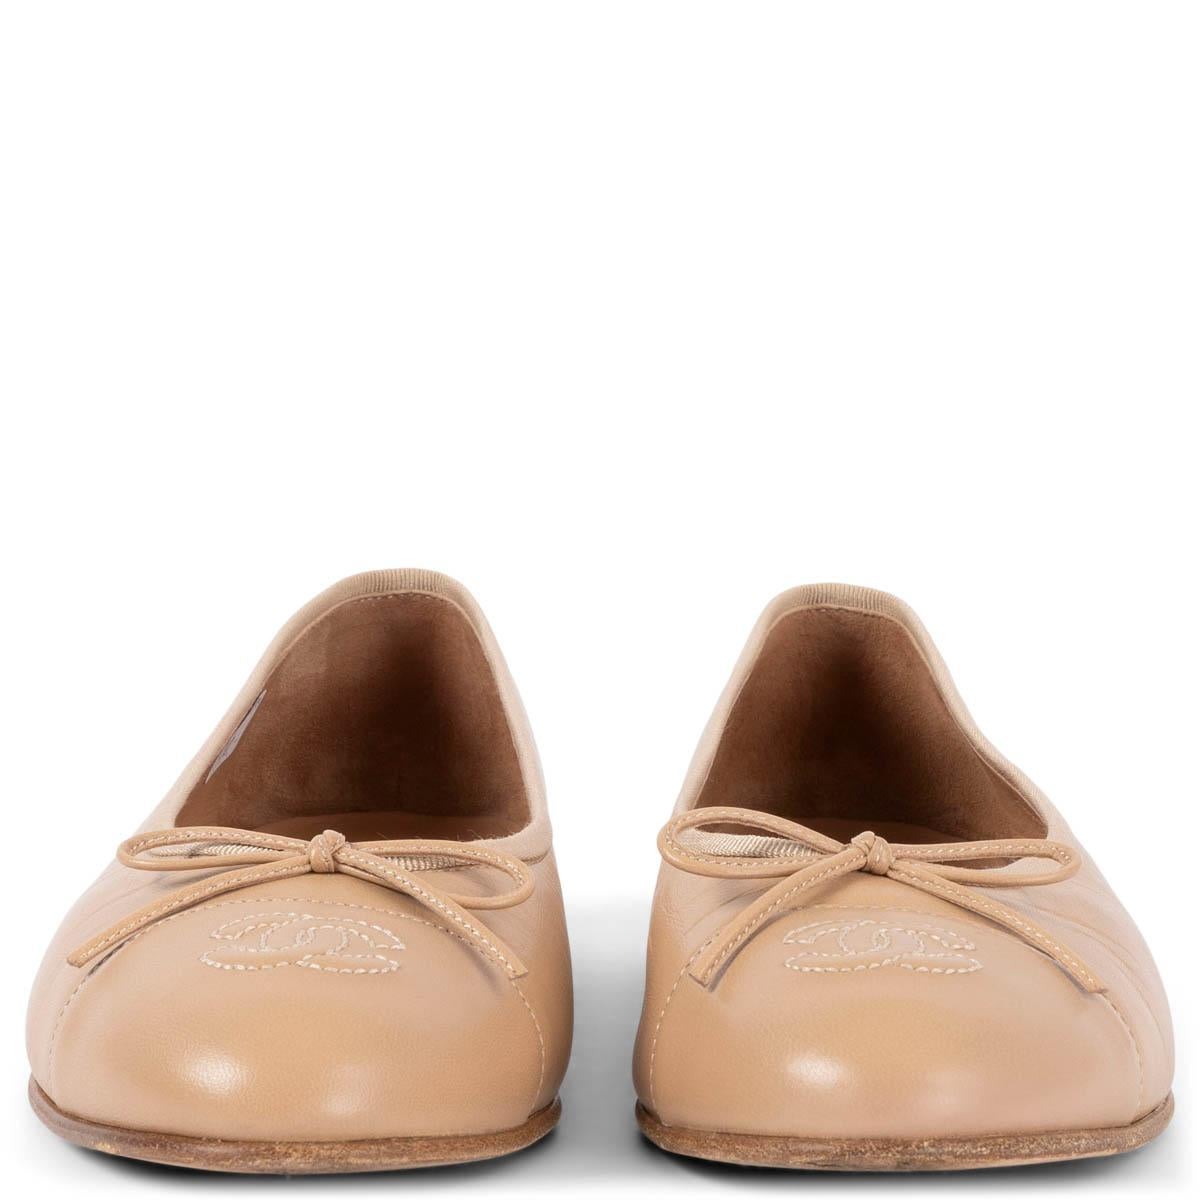 100% authentic Chanel classic ballet flats in tan smooth calfskin with CC logo stitching on cap toe. Have been worn and are in excellent condition. 

Measurements
Model	G02819
Imprinted Size	38.5
Shoe Size	38
Inside Sole	25cm (9.8in)
Width	7.5cm